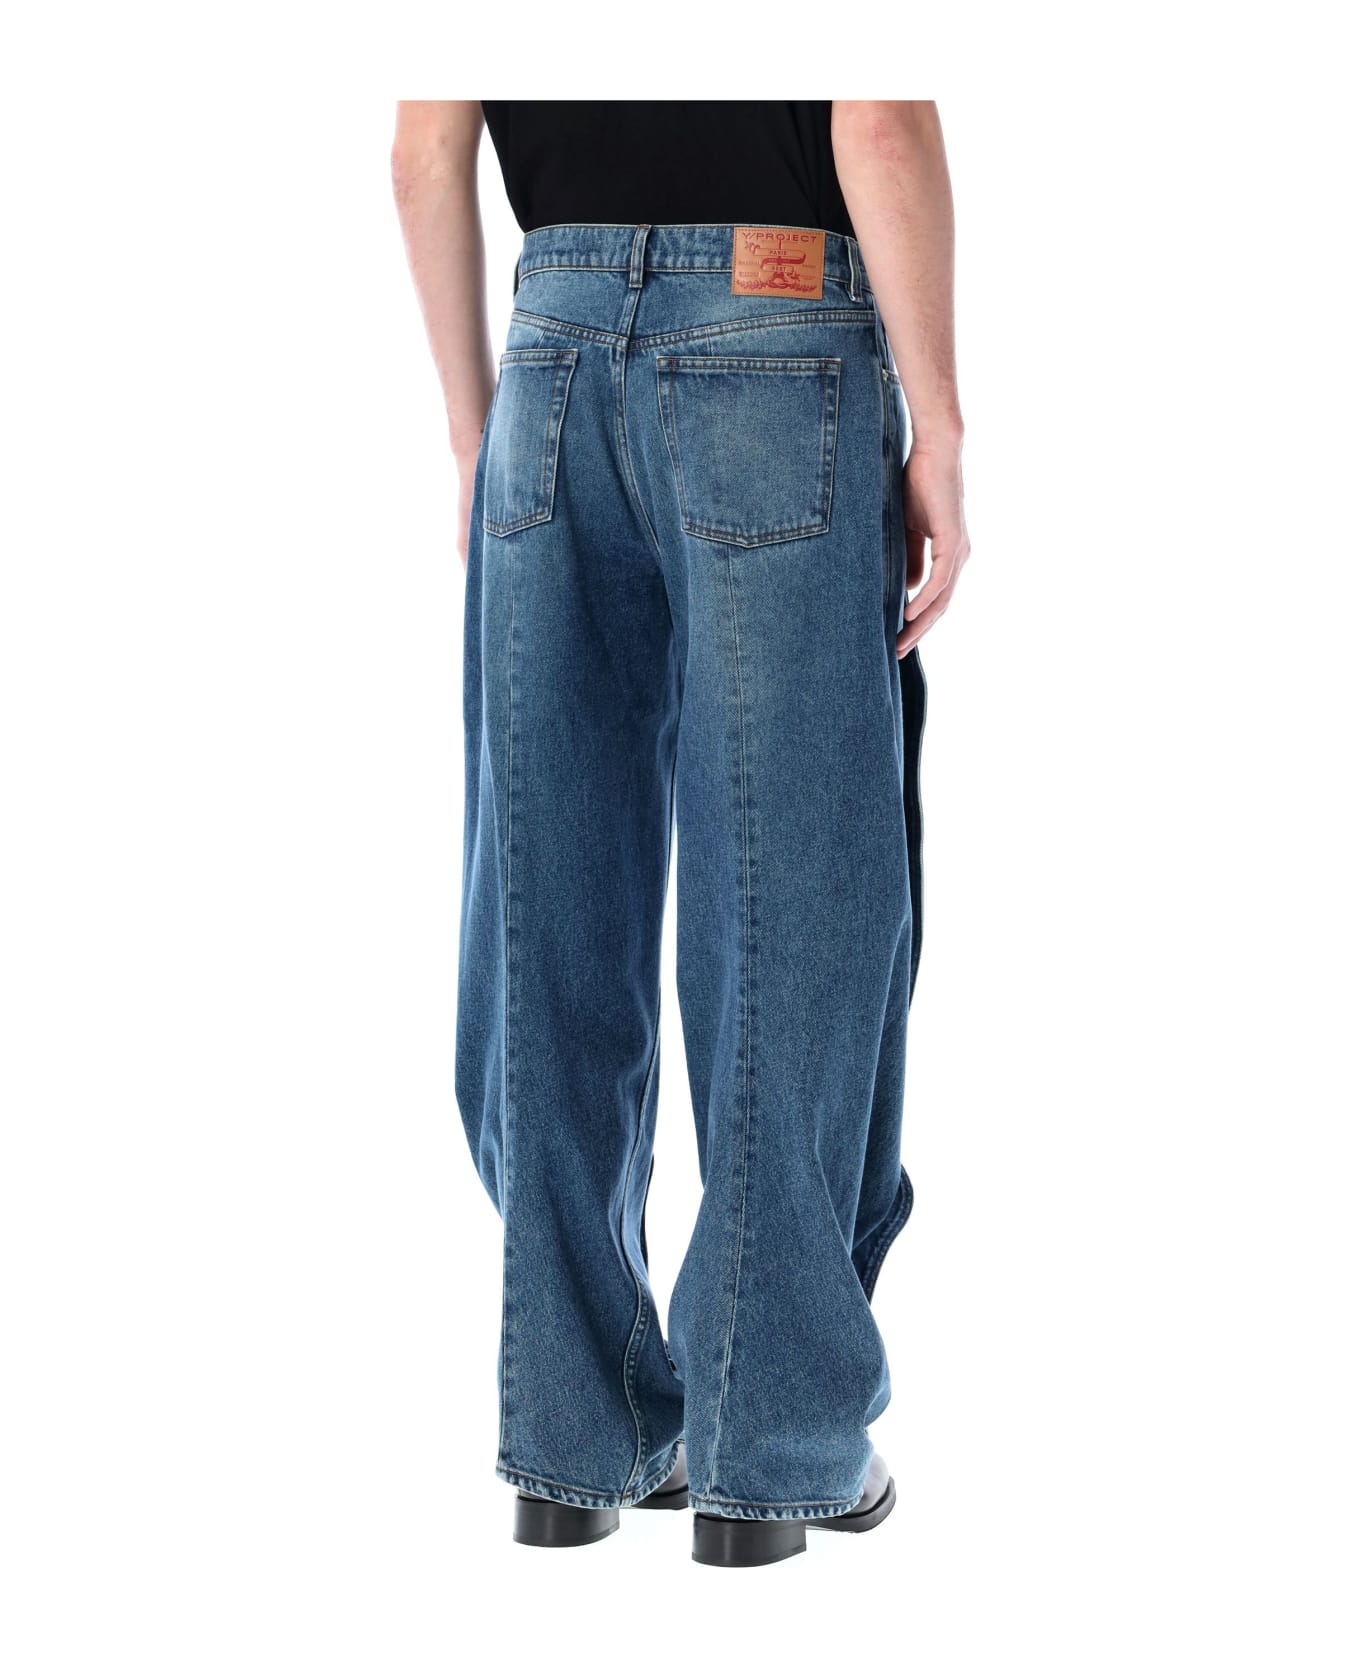 Y/Project Evergreen Banana Jeans - EVERGREEN VINTAGE BLUE